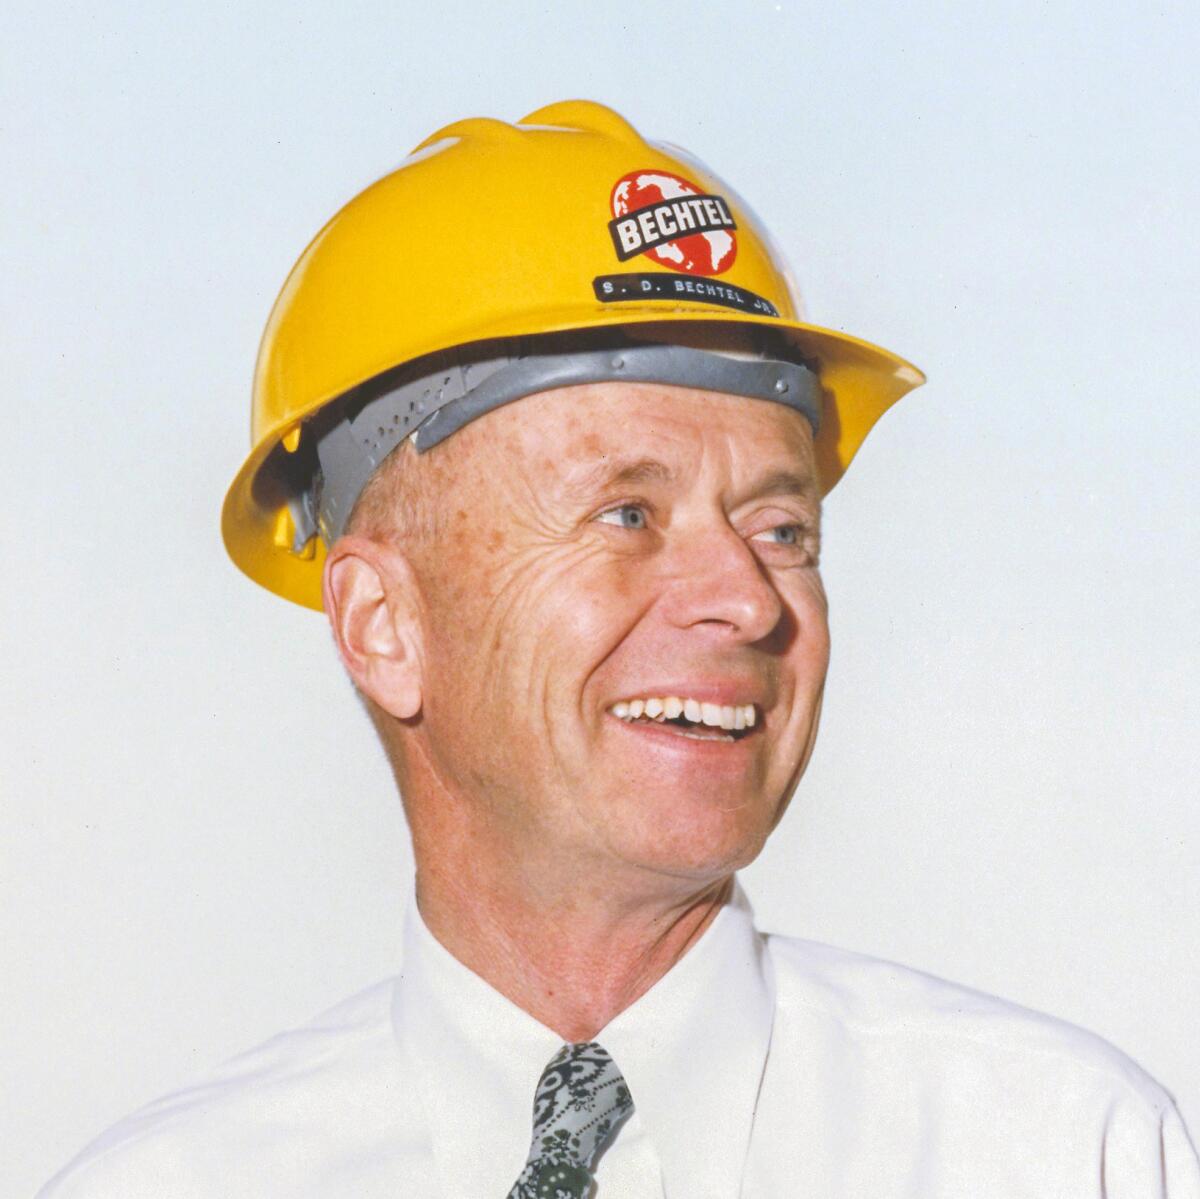 Stephen Bechtel Jr. smiles while wearing a yellow hard hat in 1960.